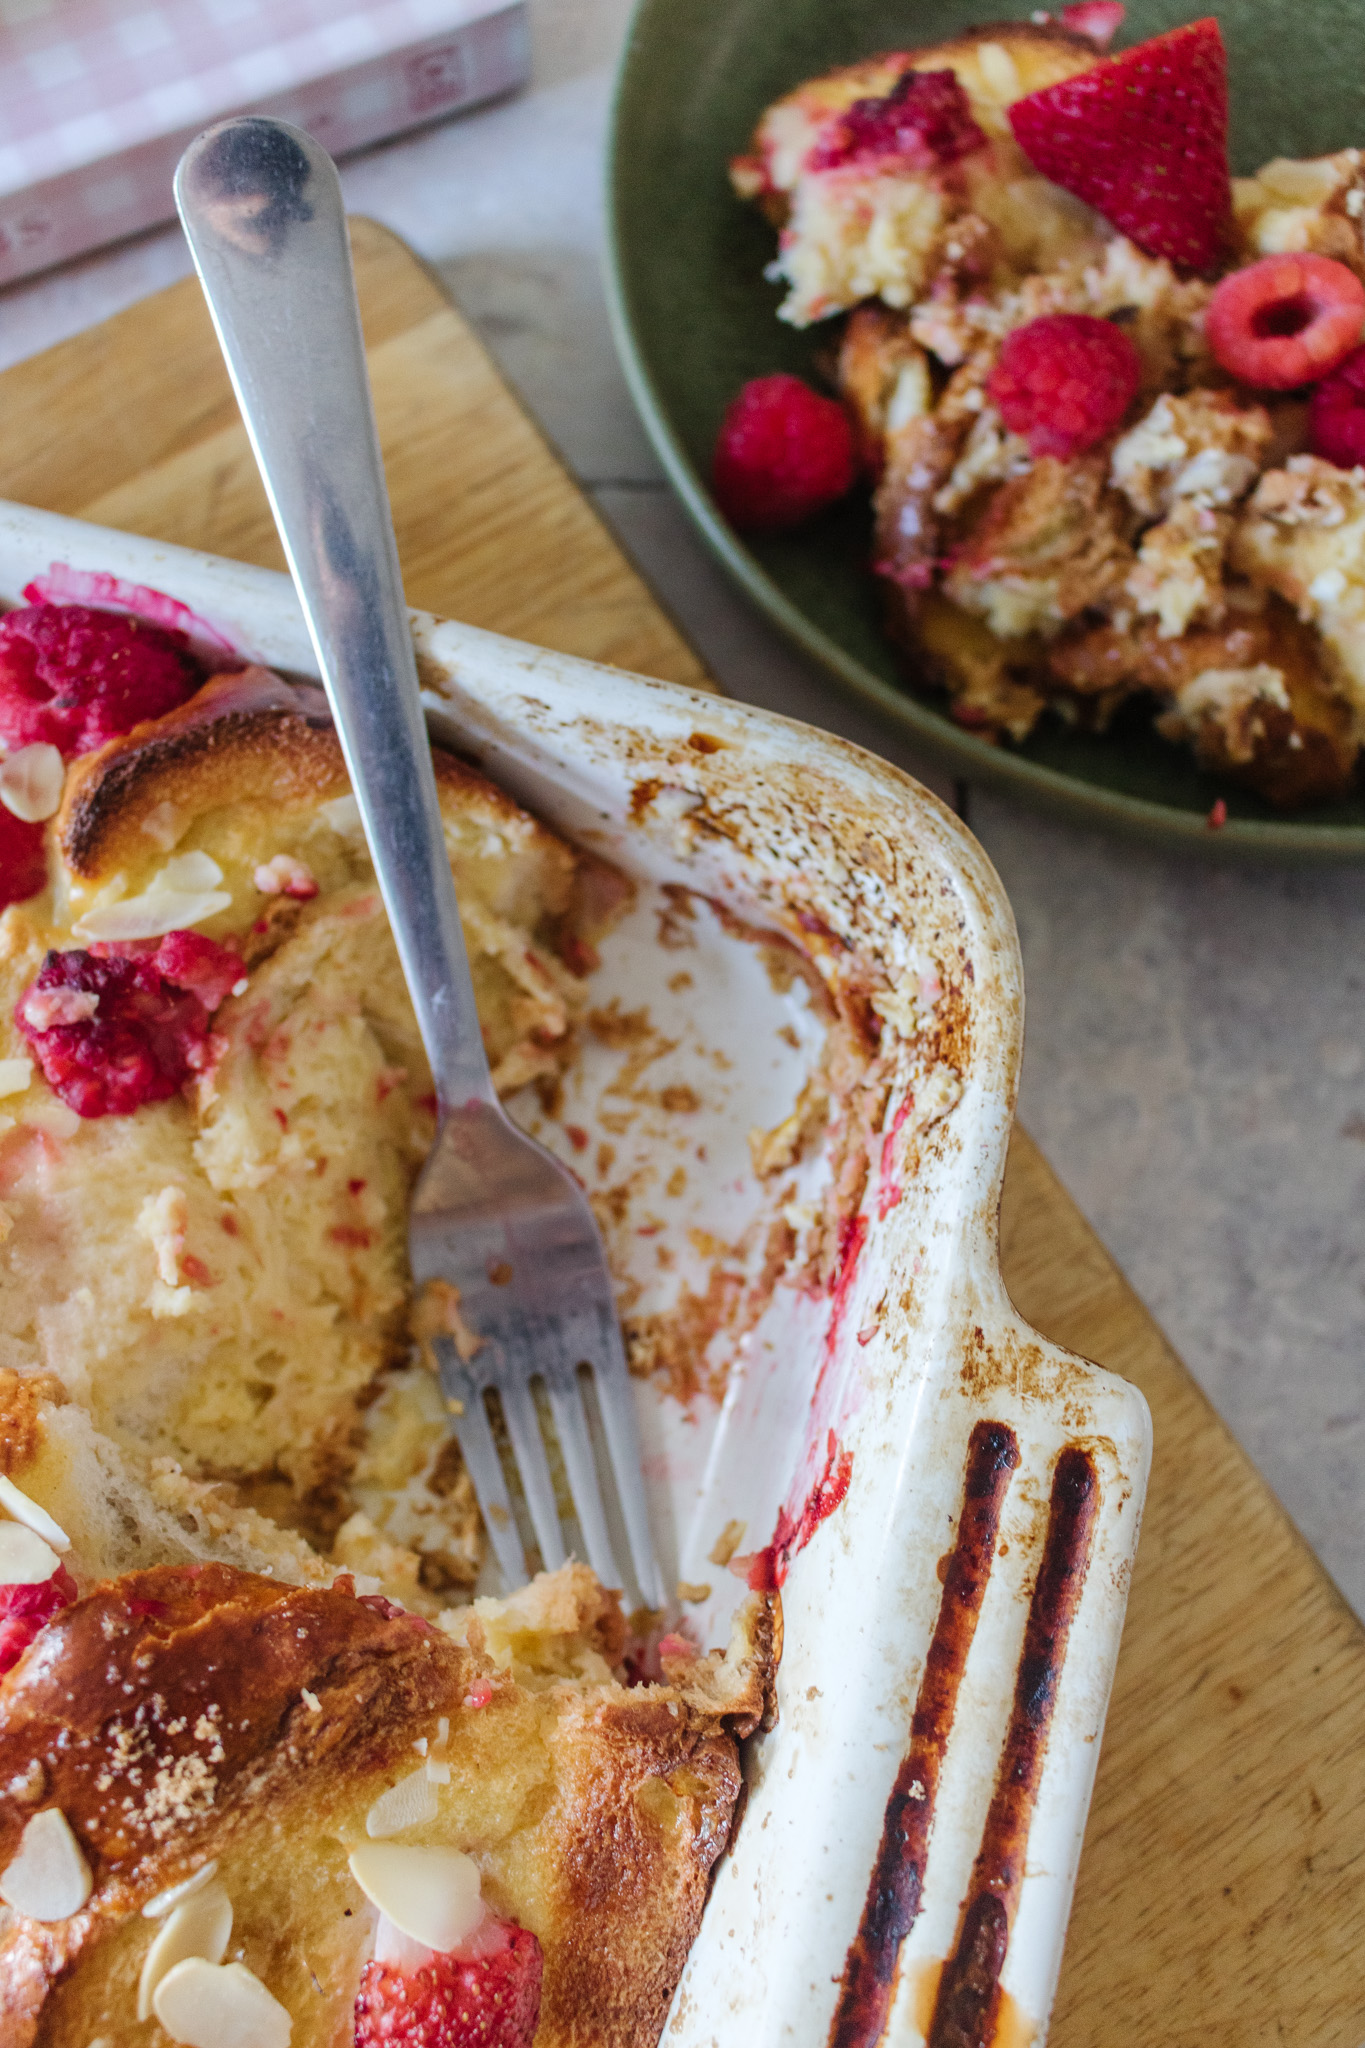 an edited lifestyle recipes raspberry rose baked French toast